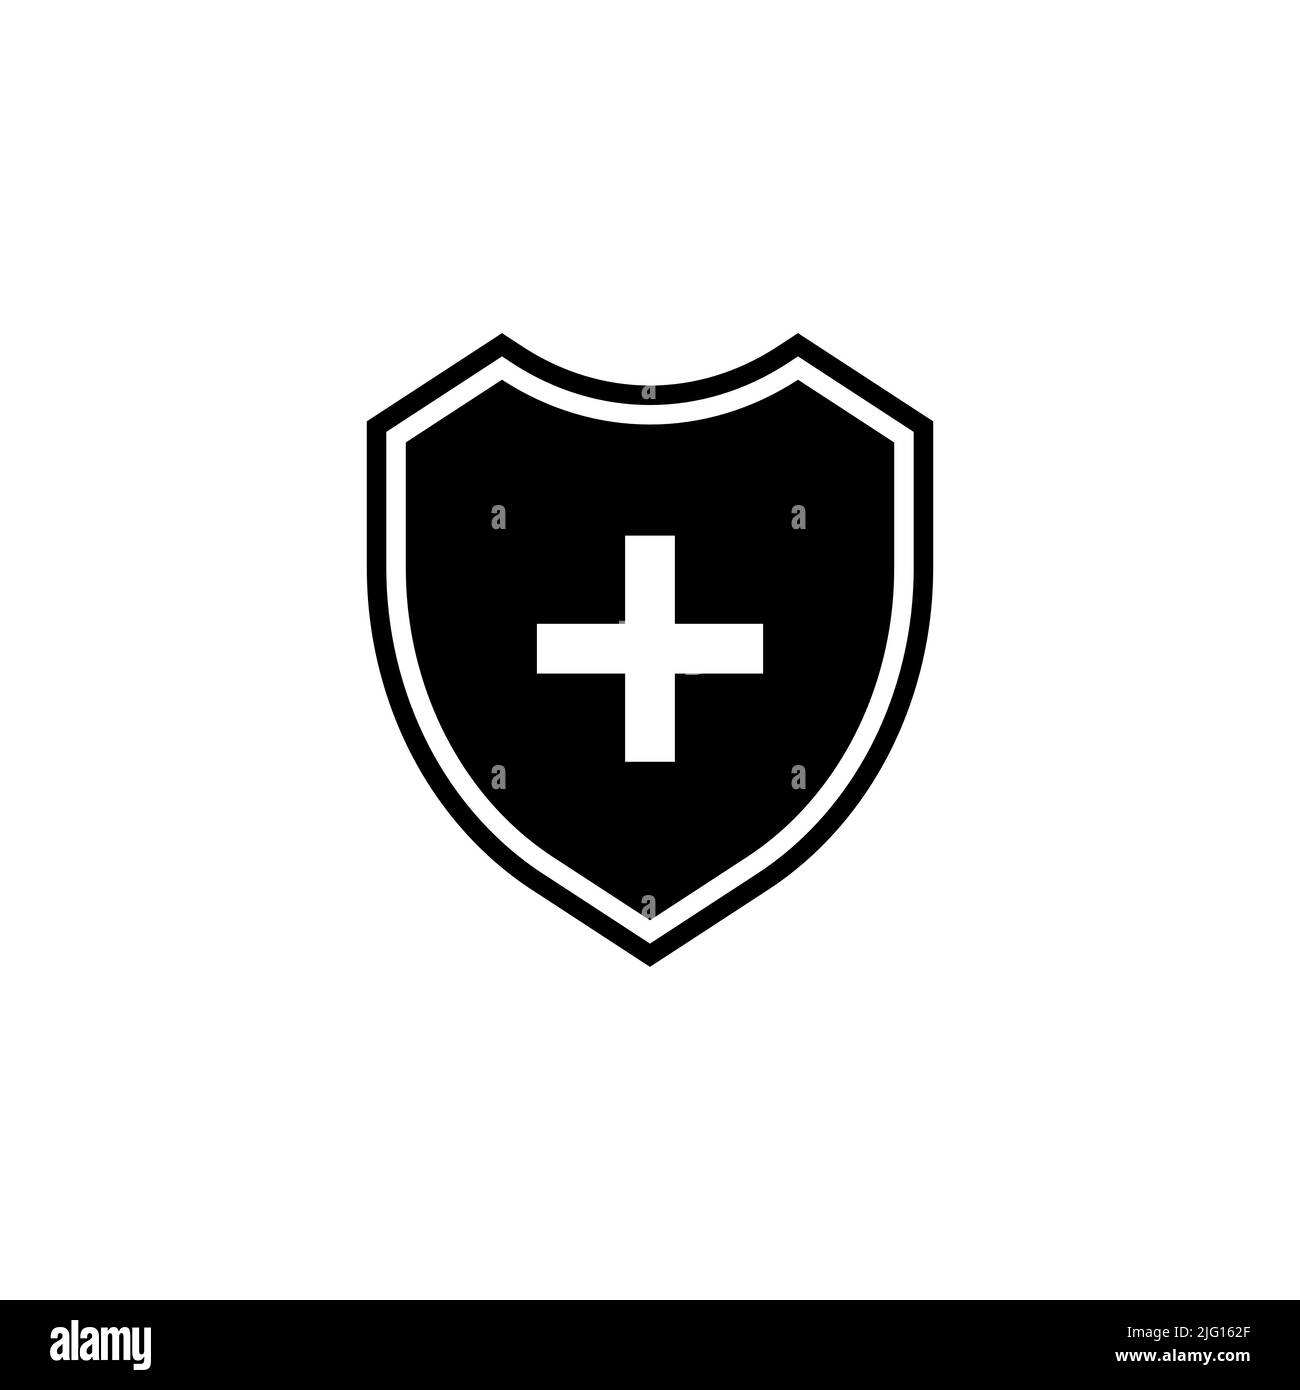 Medical shield with cross icon isolated on white background Stock Vector